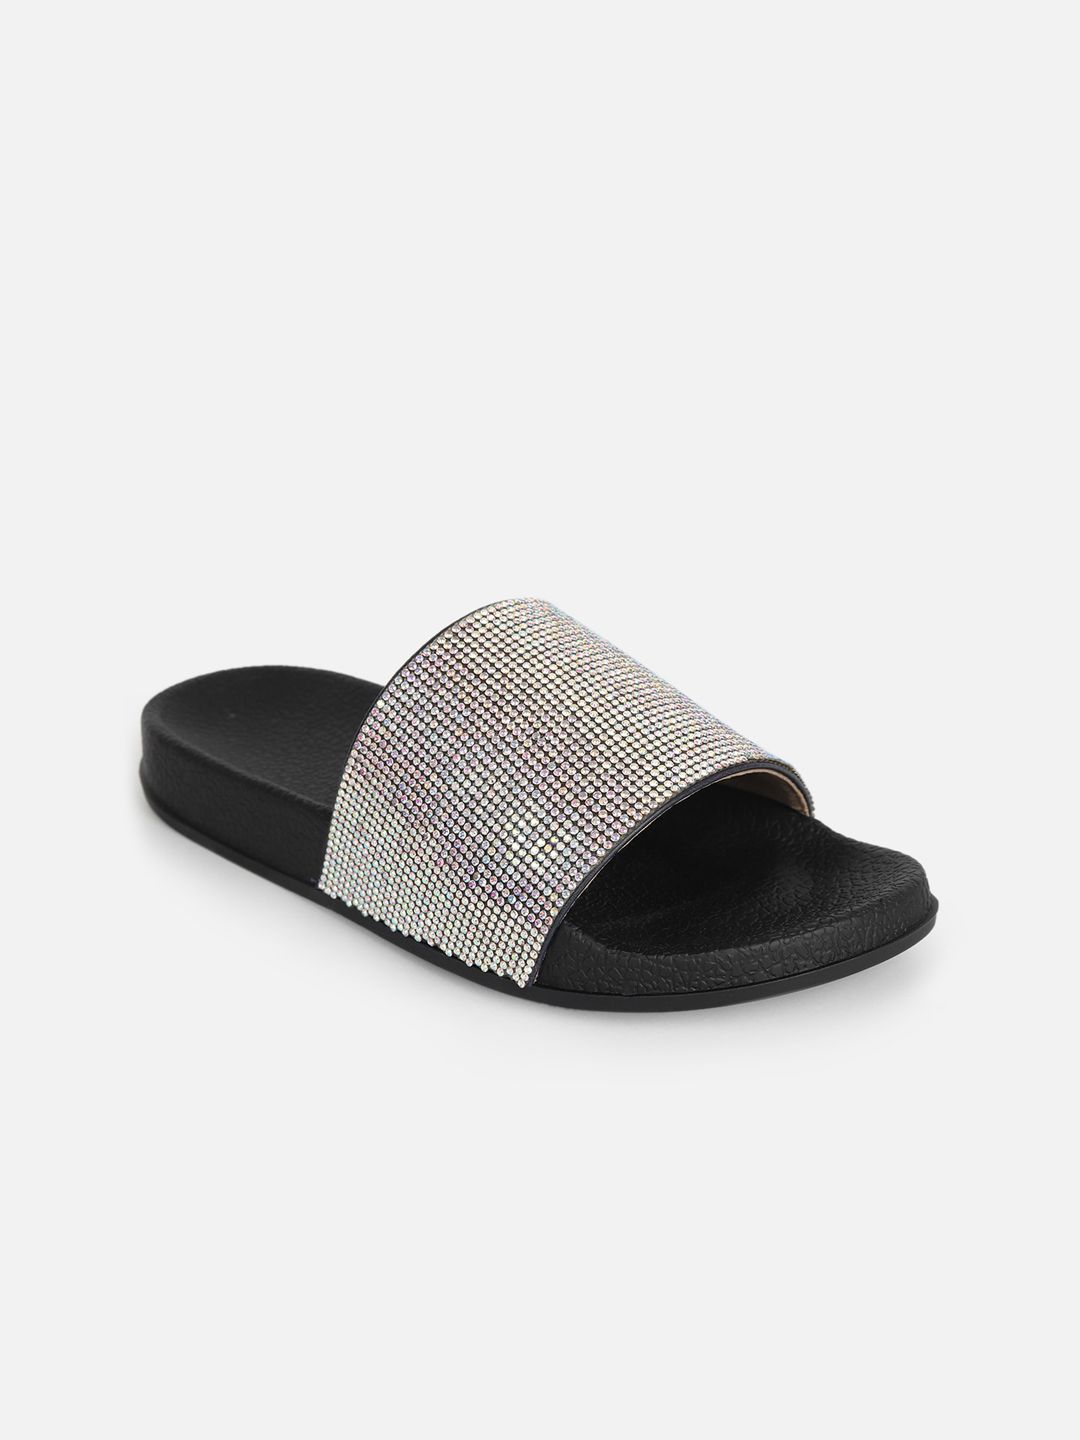 SCENTRA Women Silver-Toned & Black Embellished Sliders Price in India